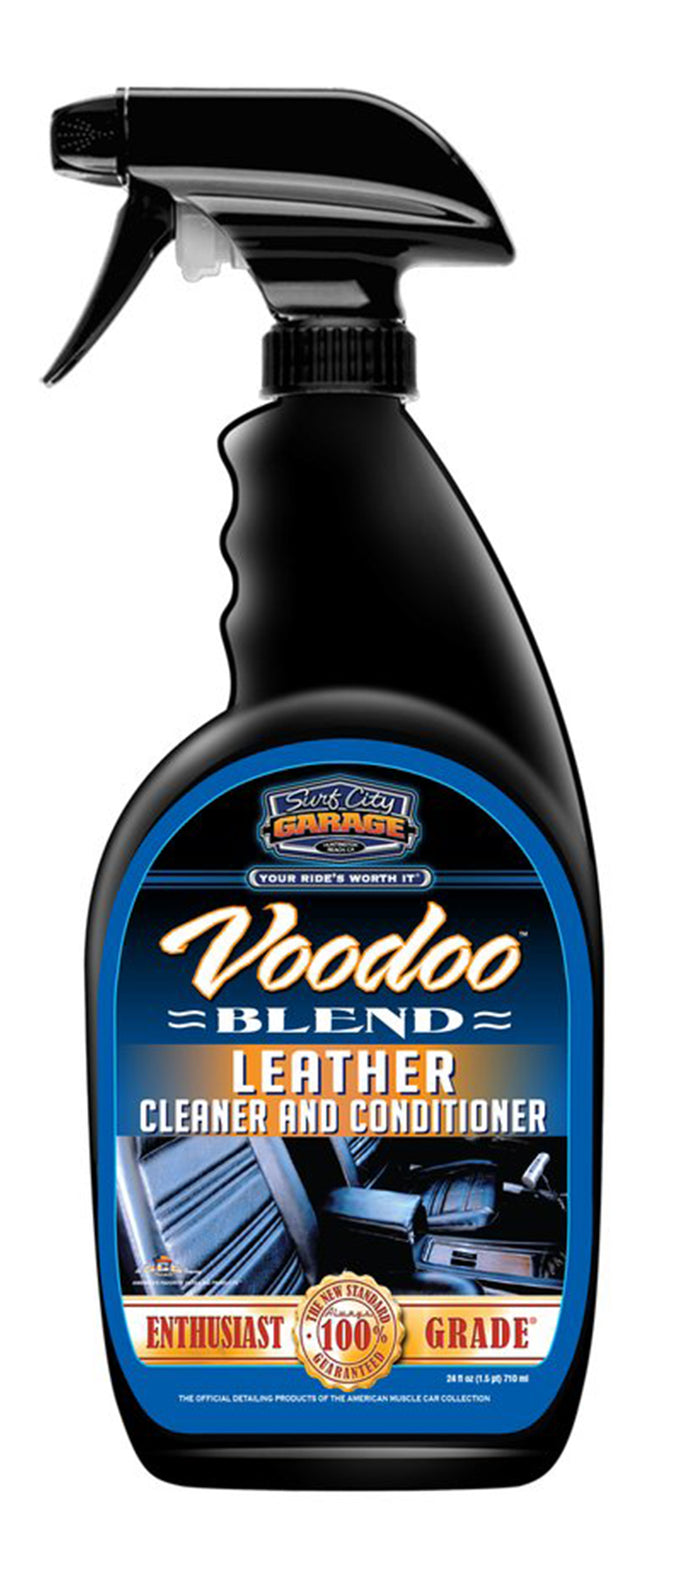 Voodoo Blend® Leather Cleaner and Conditioner